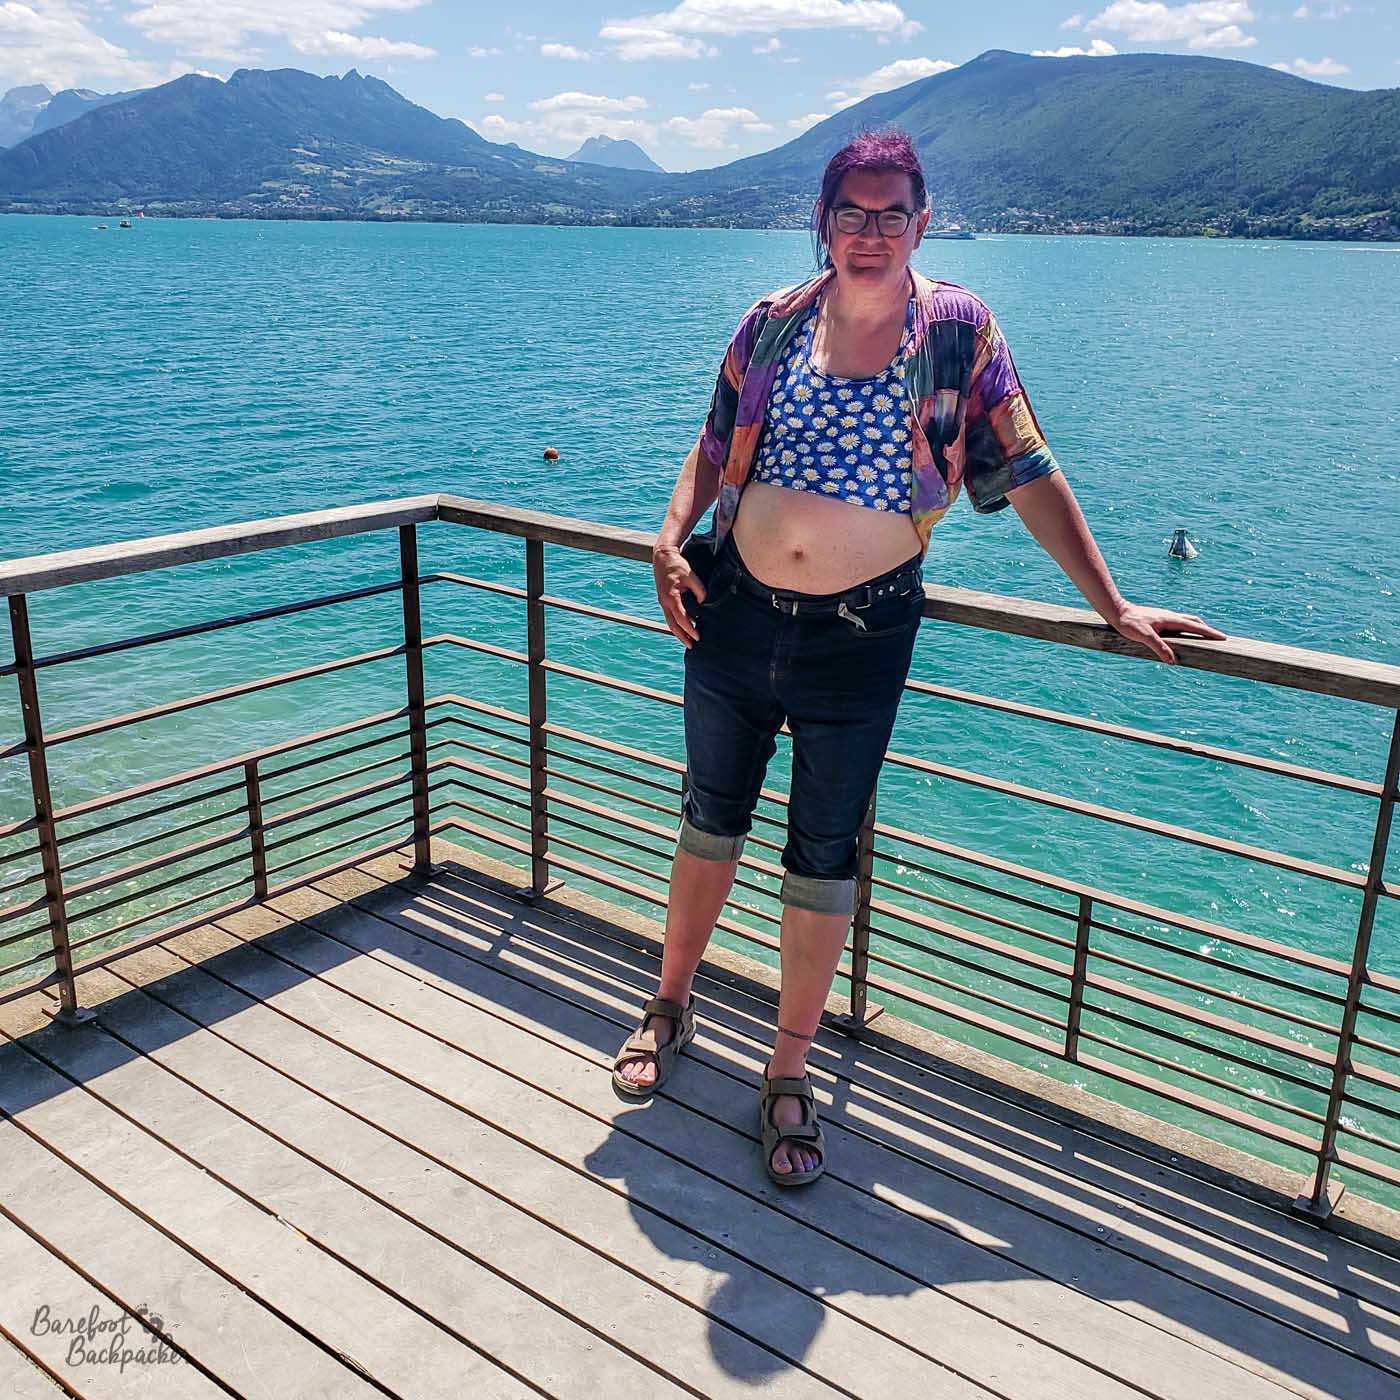 person stands on a boardwalk, with a lake, mountains, and clear skies behind them, They're wearing a patchwork shirt that's fully open, revealing a crop-top with a daisy motif. Their stomach is bare. They're also wearing jeans that are cuffed just below the knee, and sandals.